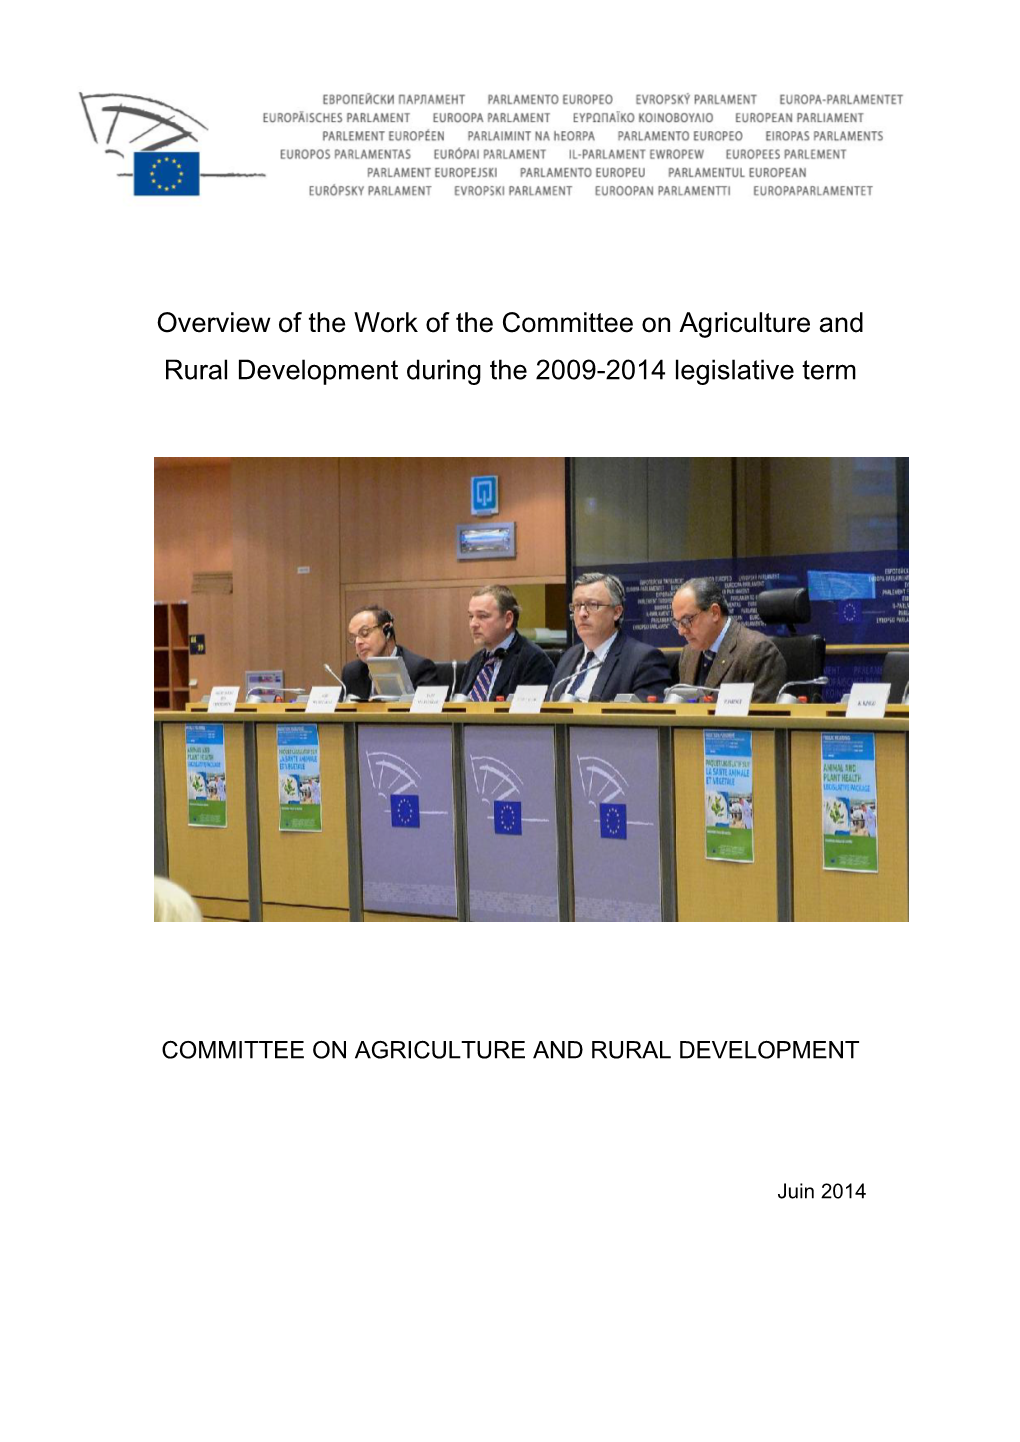 Overview of the Work of the Committee on Agriculture and Rural Development During the 2009-2014 Legislative Term